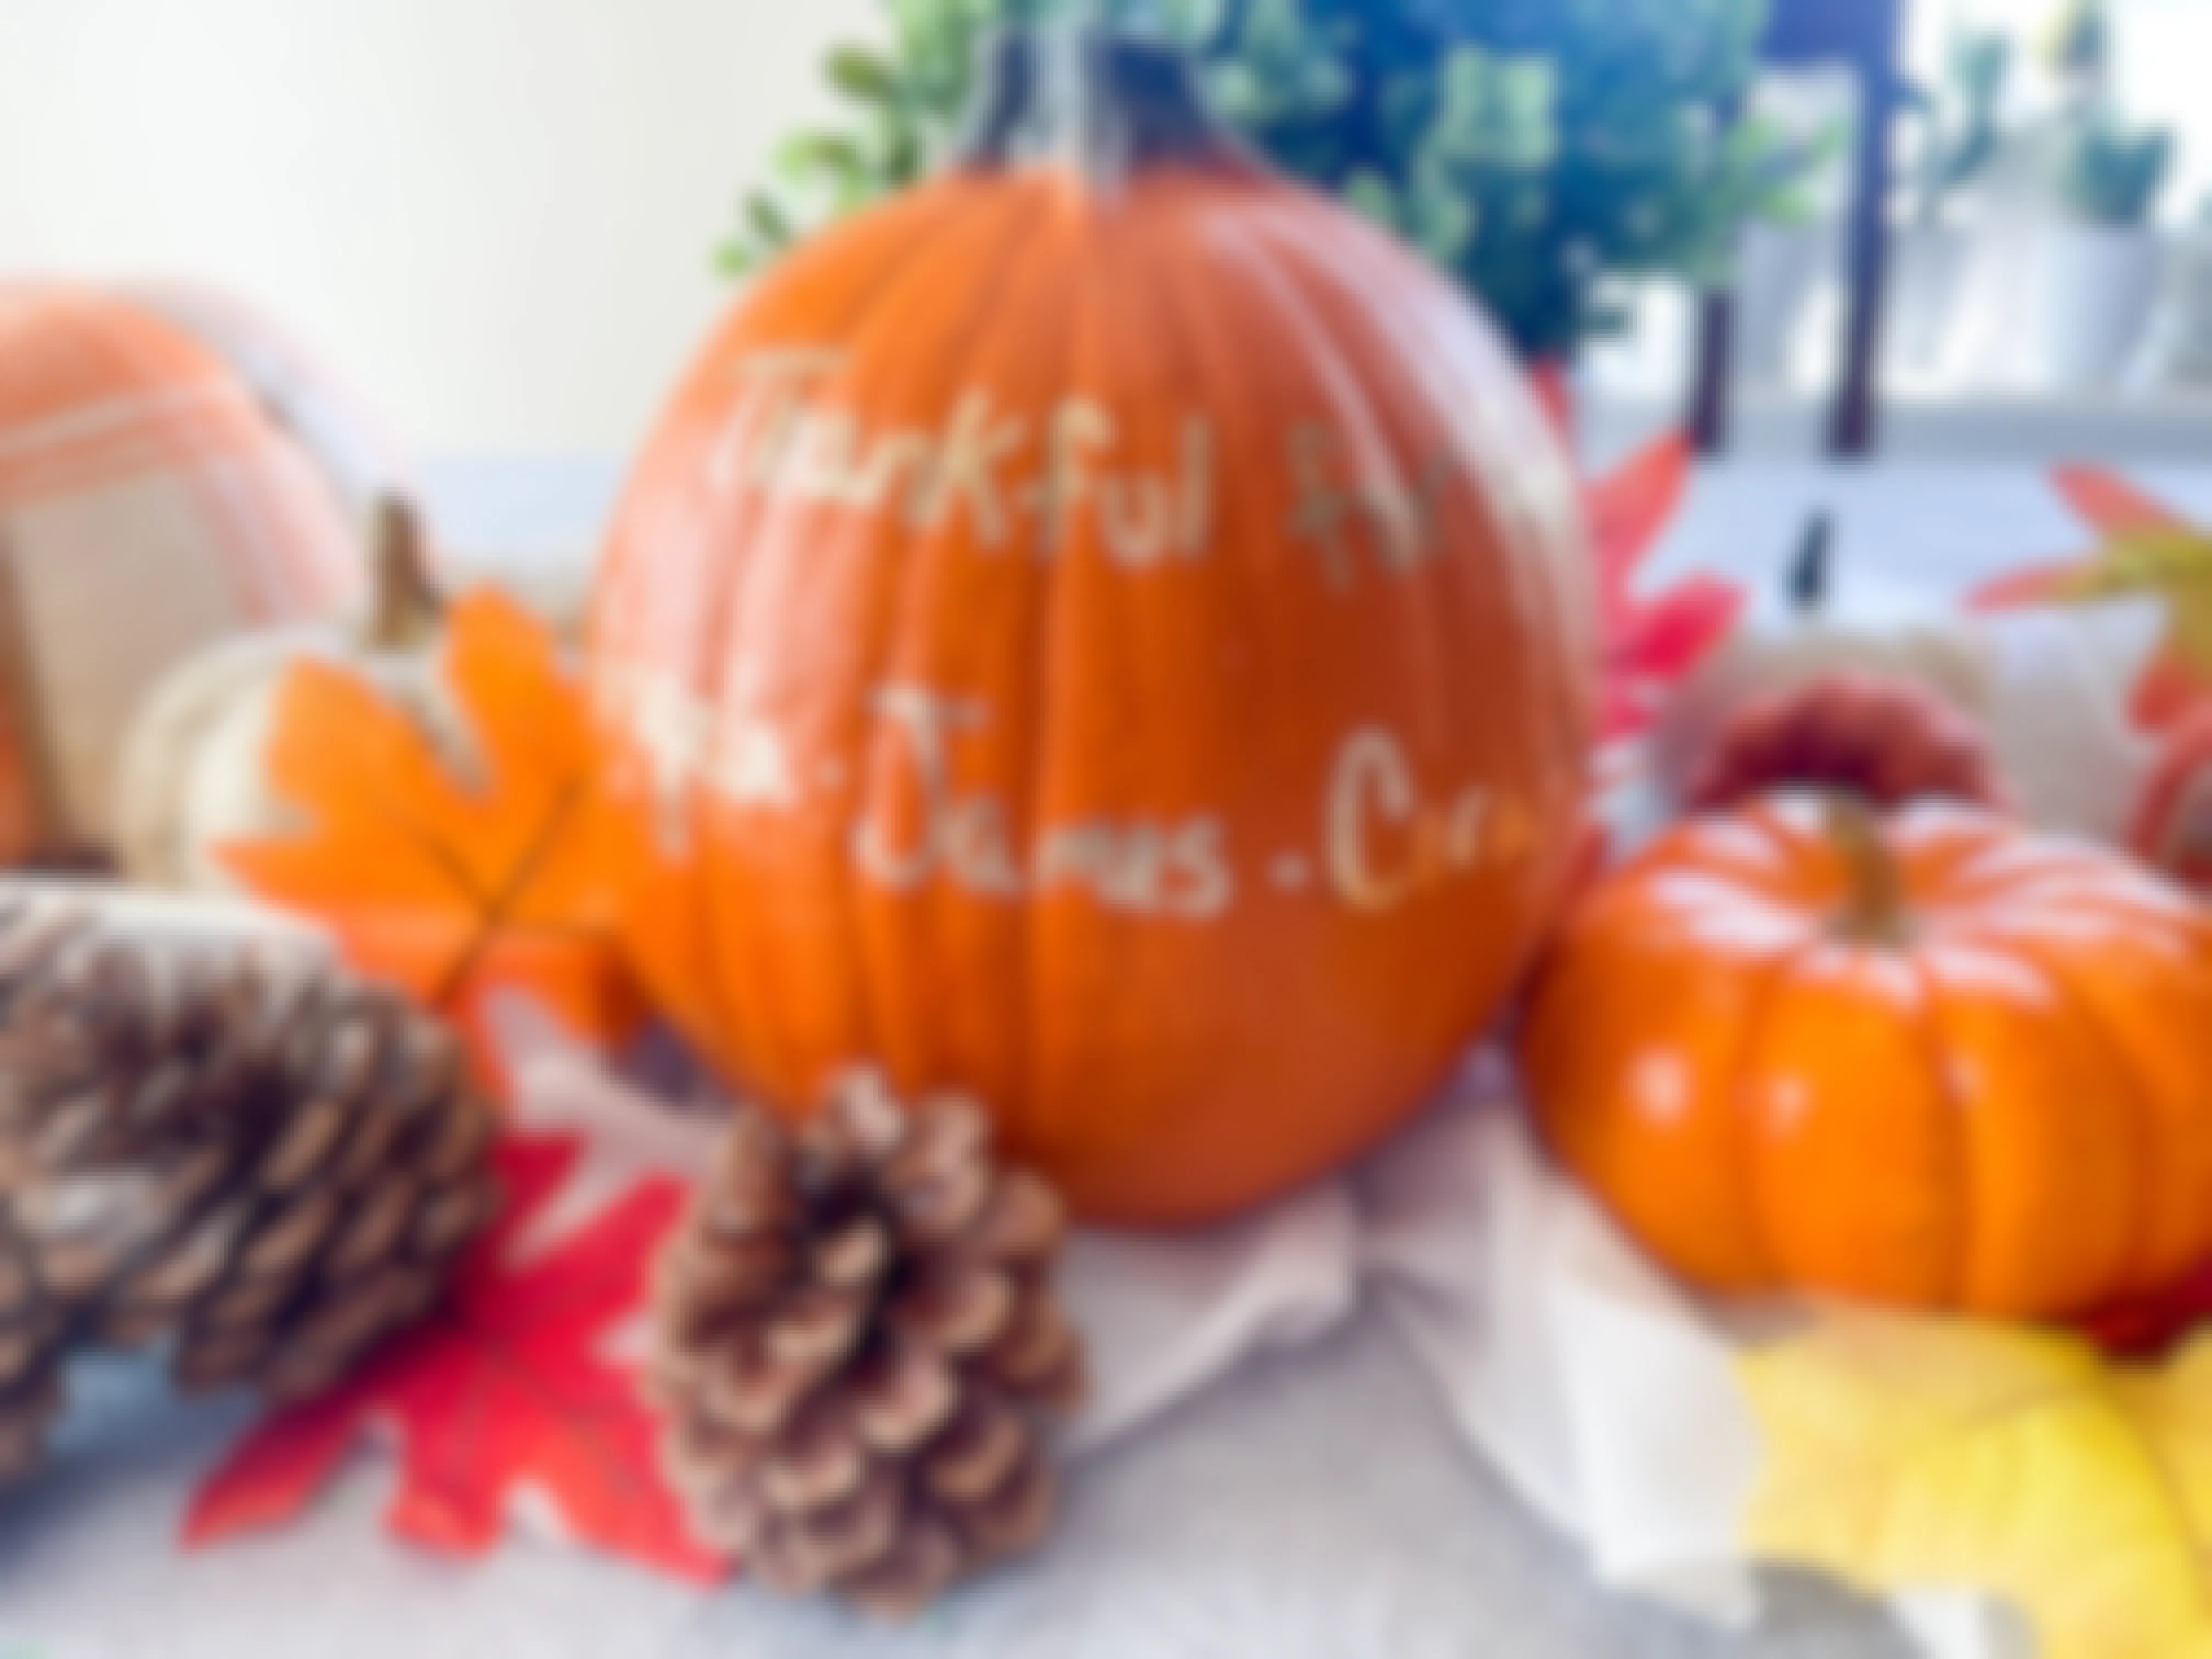 thankful message and names written in metallic pen on a pumpkin sitting on a table